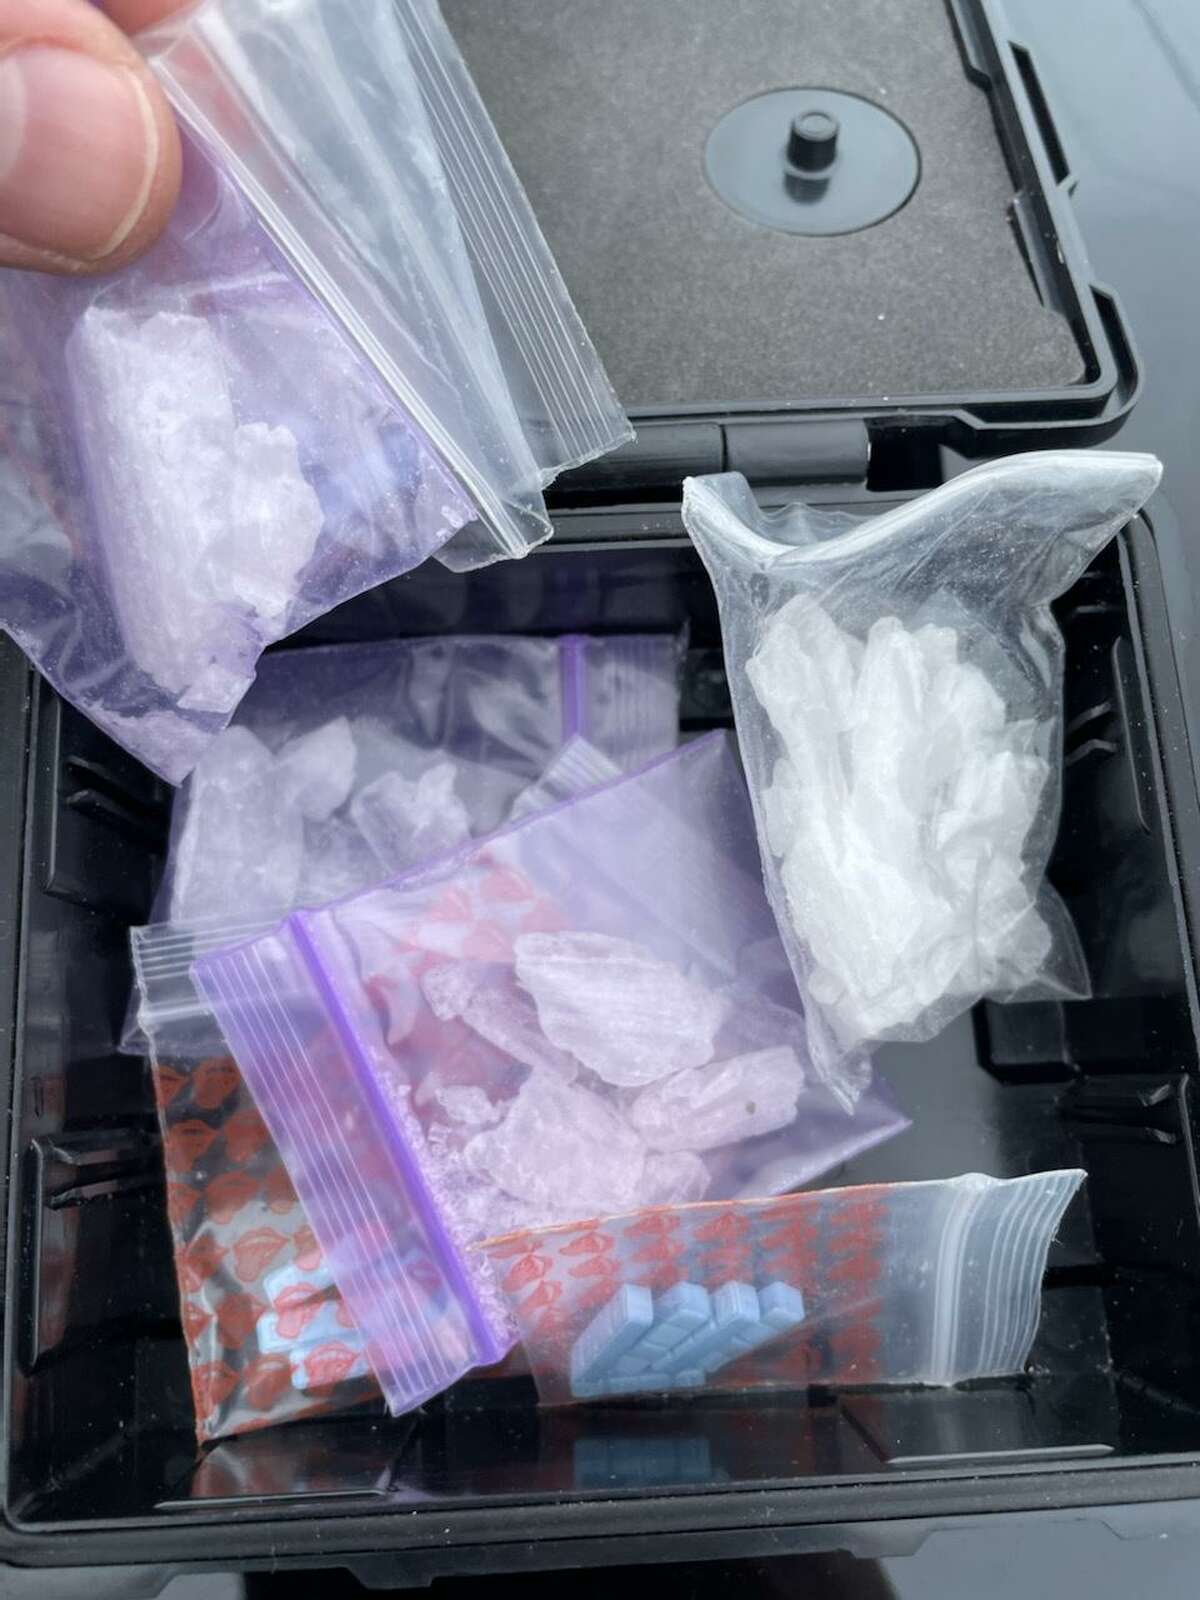 The Jefferson County Sheriff's Office turned a routine traffic stop on Wednesday into a significant arrest after finding multiple drugs, according to the agency.